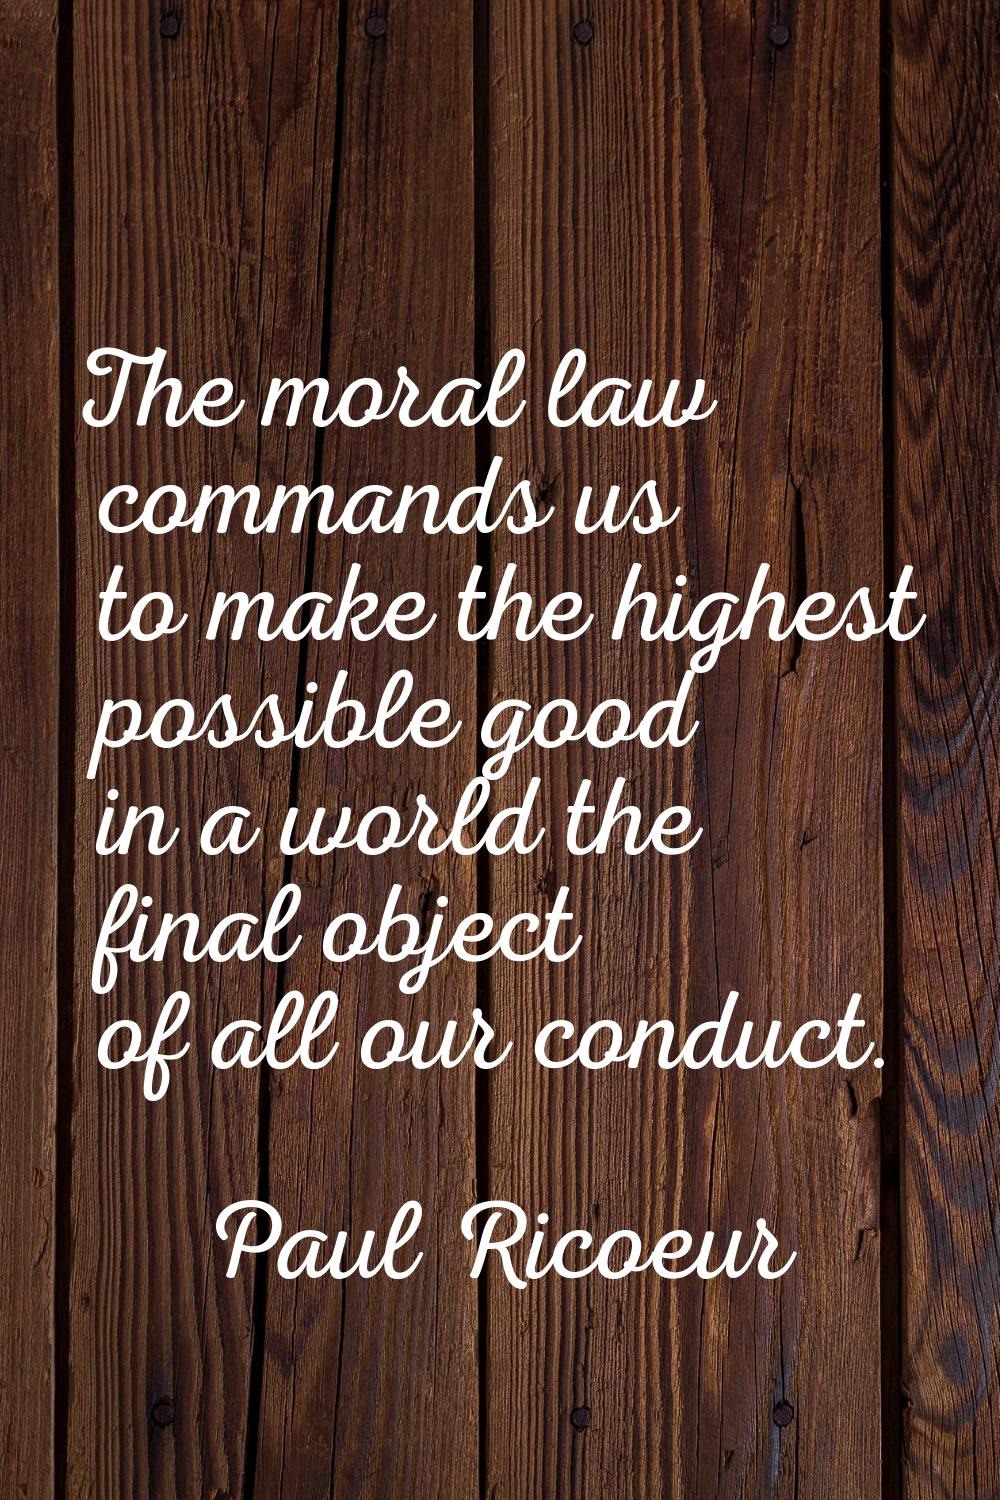 The moral law commands us to make the highest possible good in a world the final object of all our 